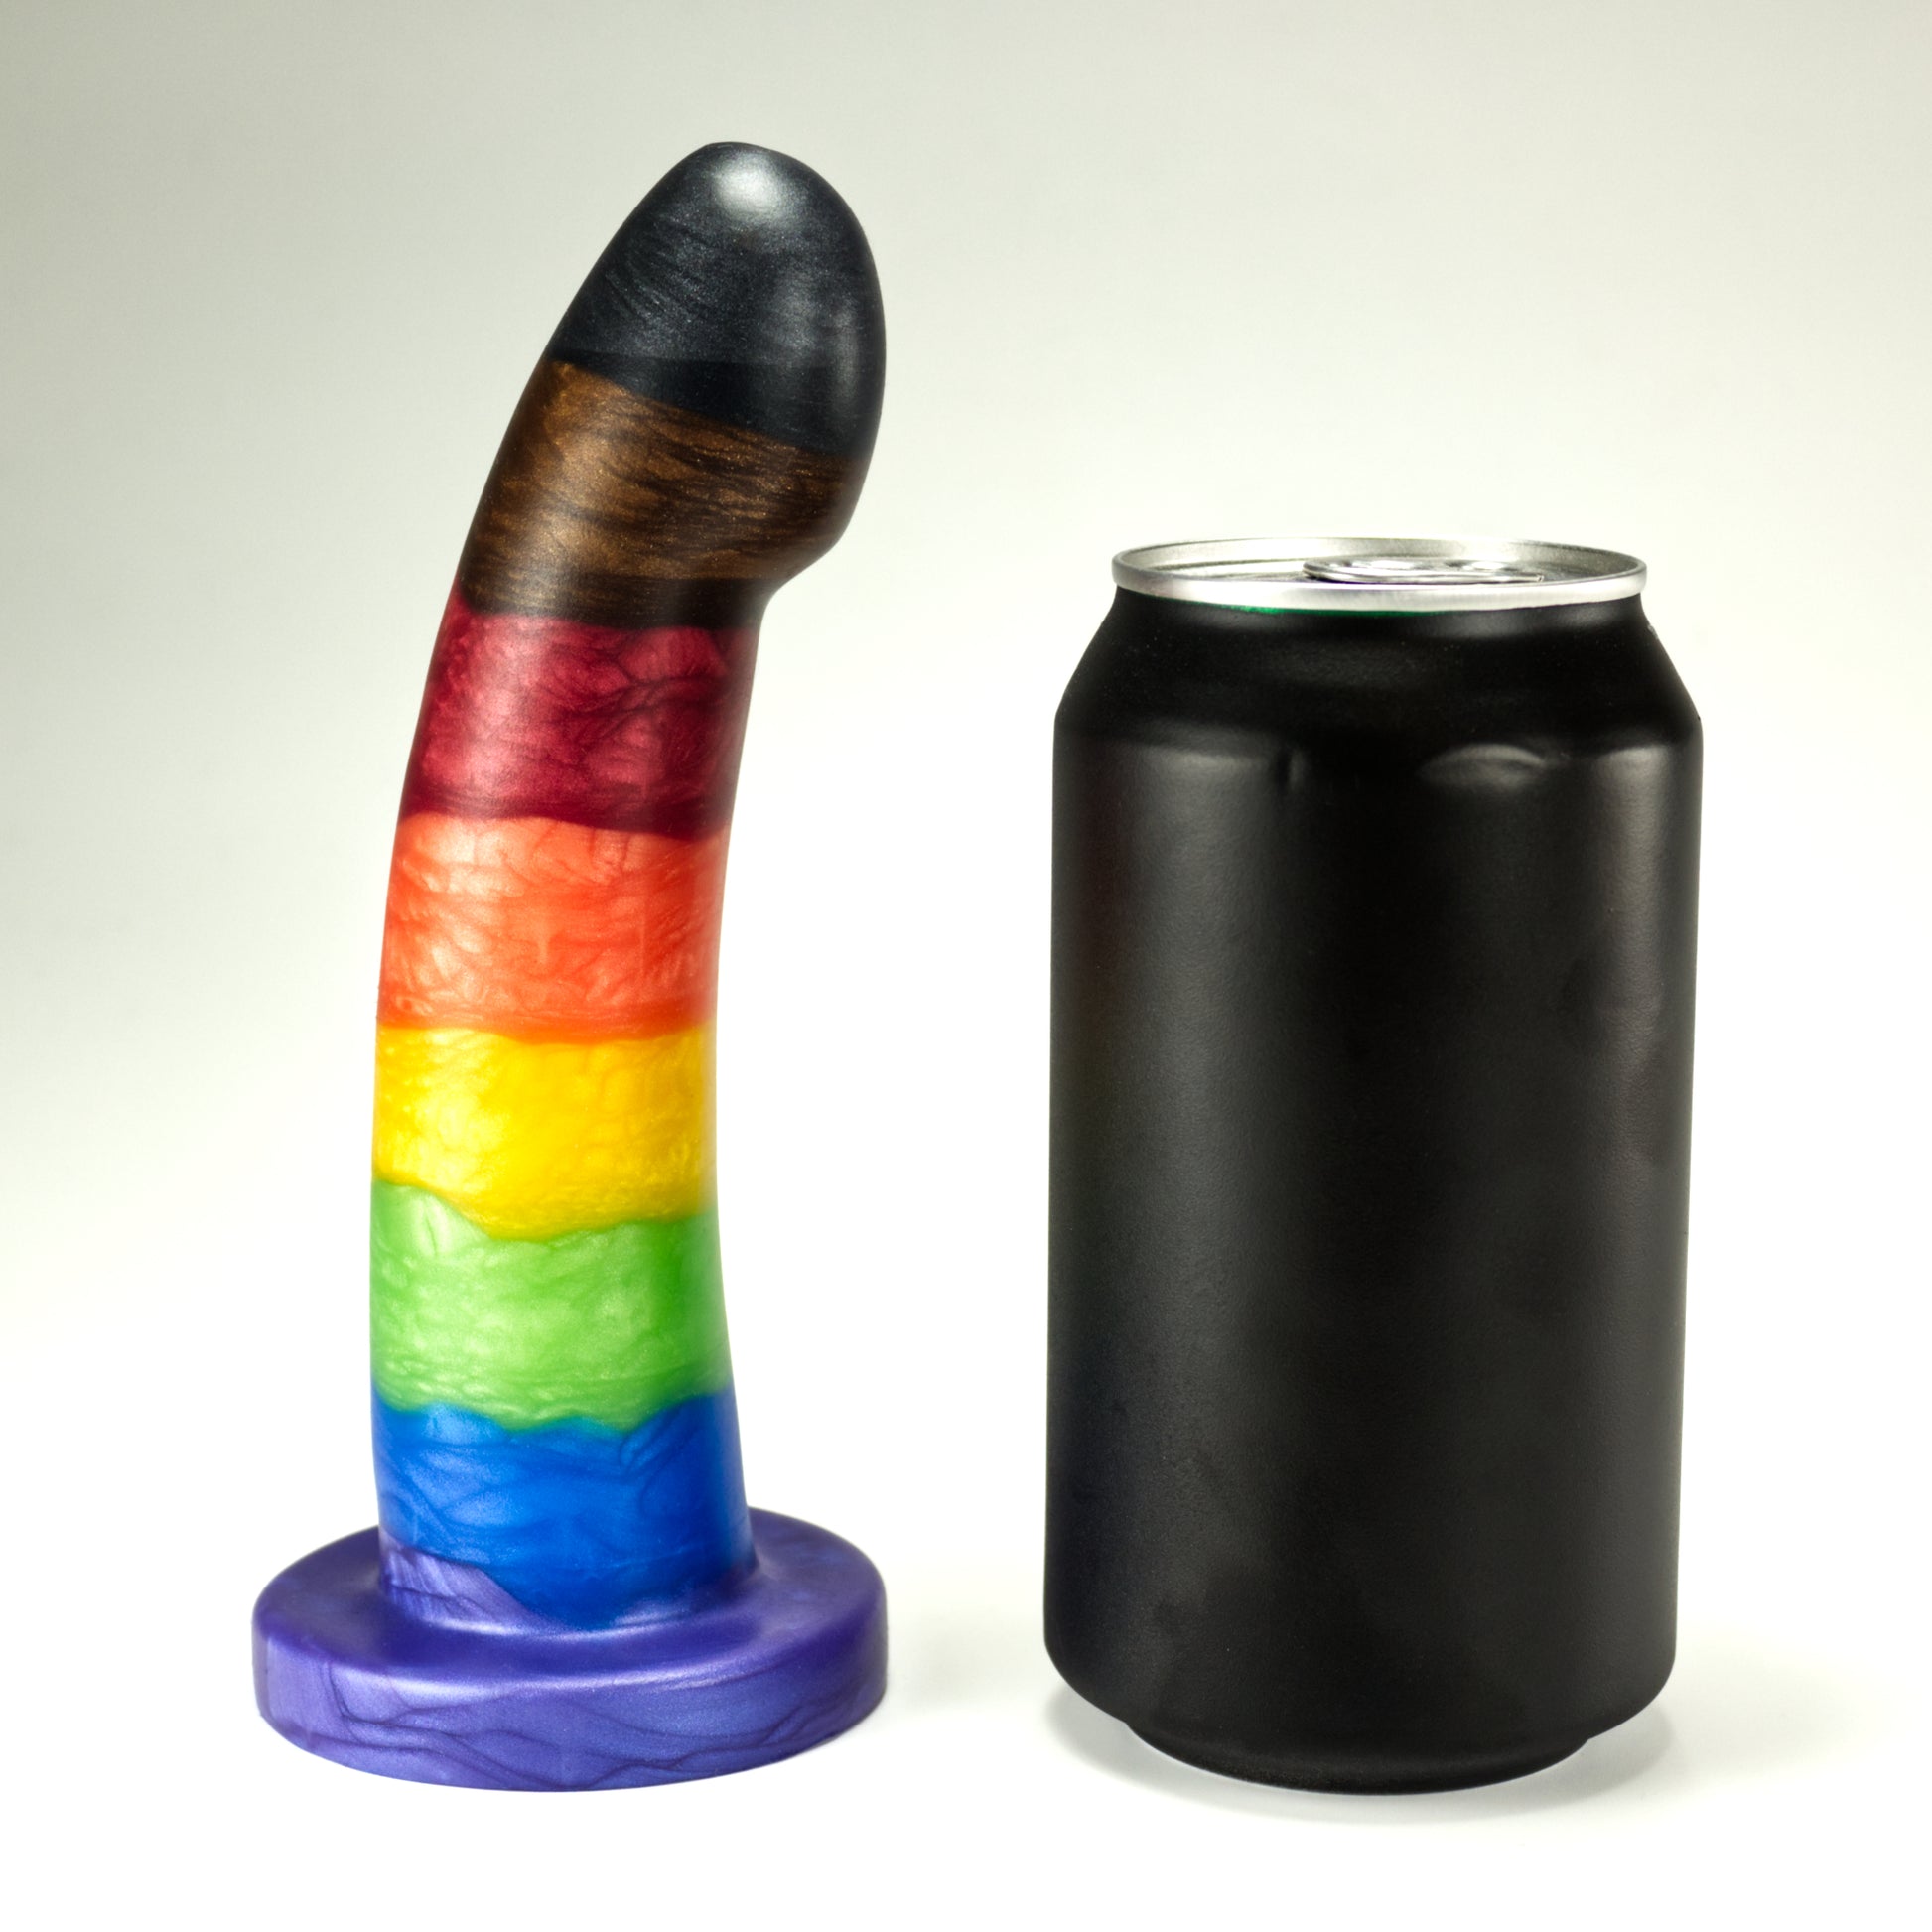 Side view of the Sidekick Small next to a standard soda can, showing that the dildo is a little taller and a little more than half of the width of the can.